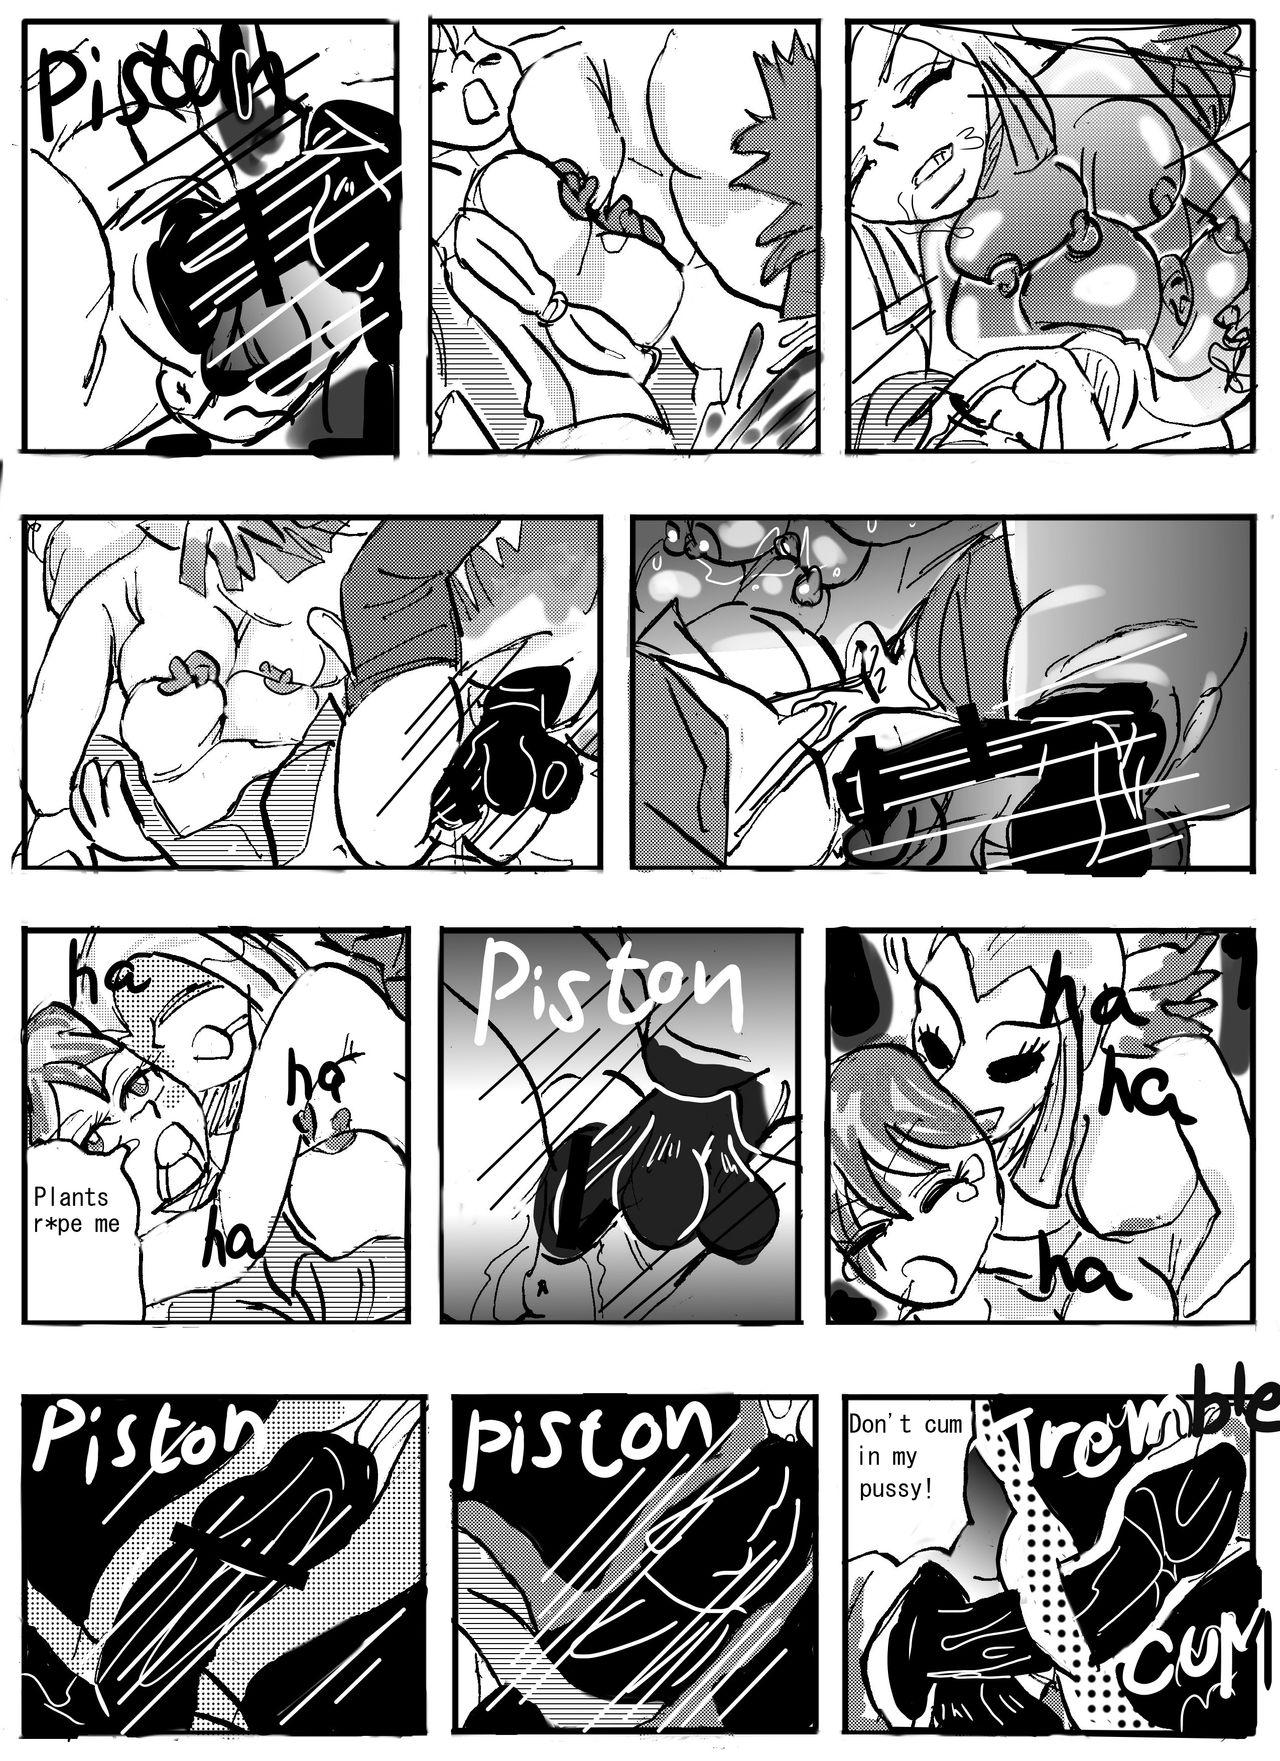 Solo Flower vore "Human and plant heterosexual ra*e and seed bed" - Original Pinoy - Page 9